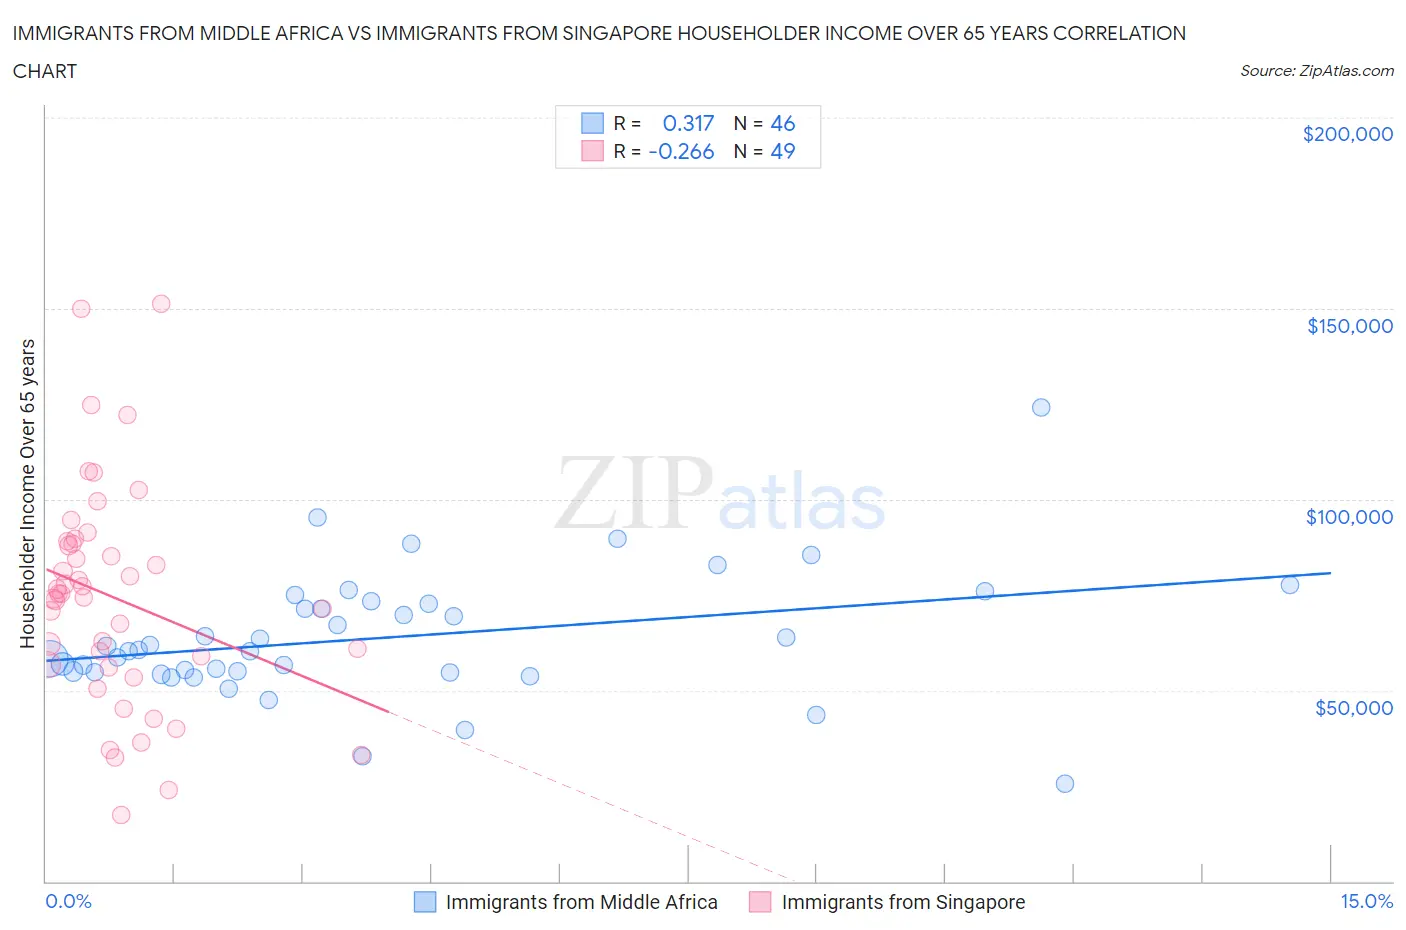 Immigrants from Middle Africa vs Immigrants from Singapore Householder Income Over 65 years